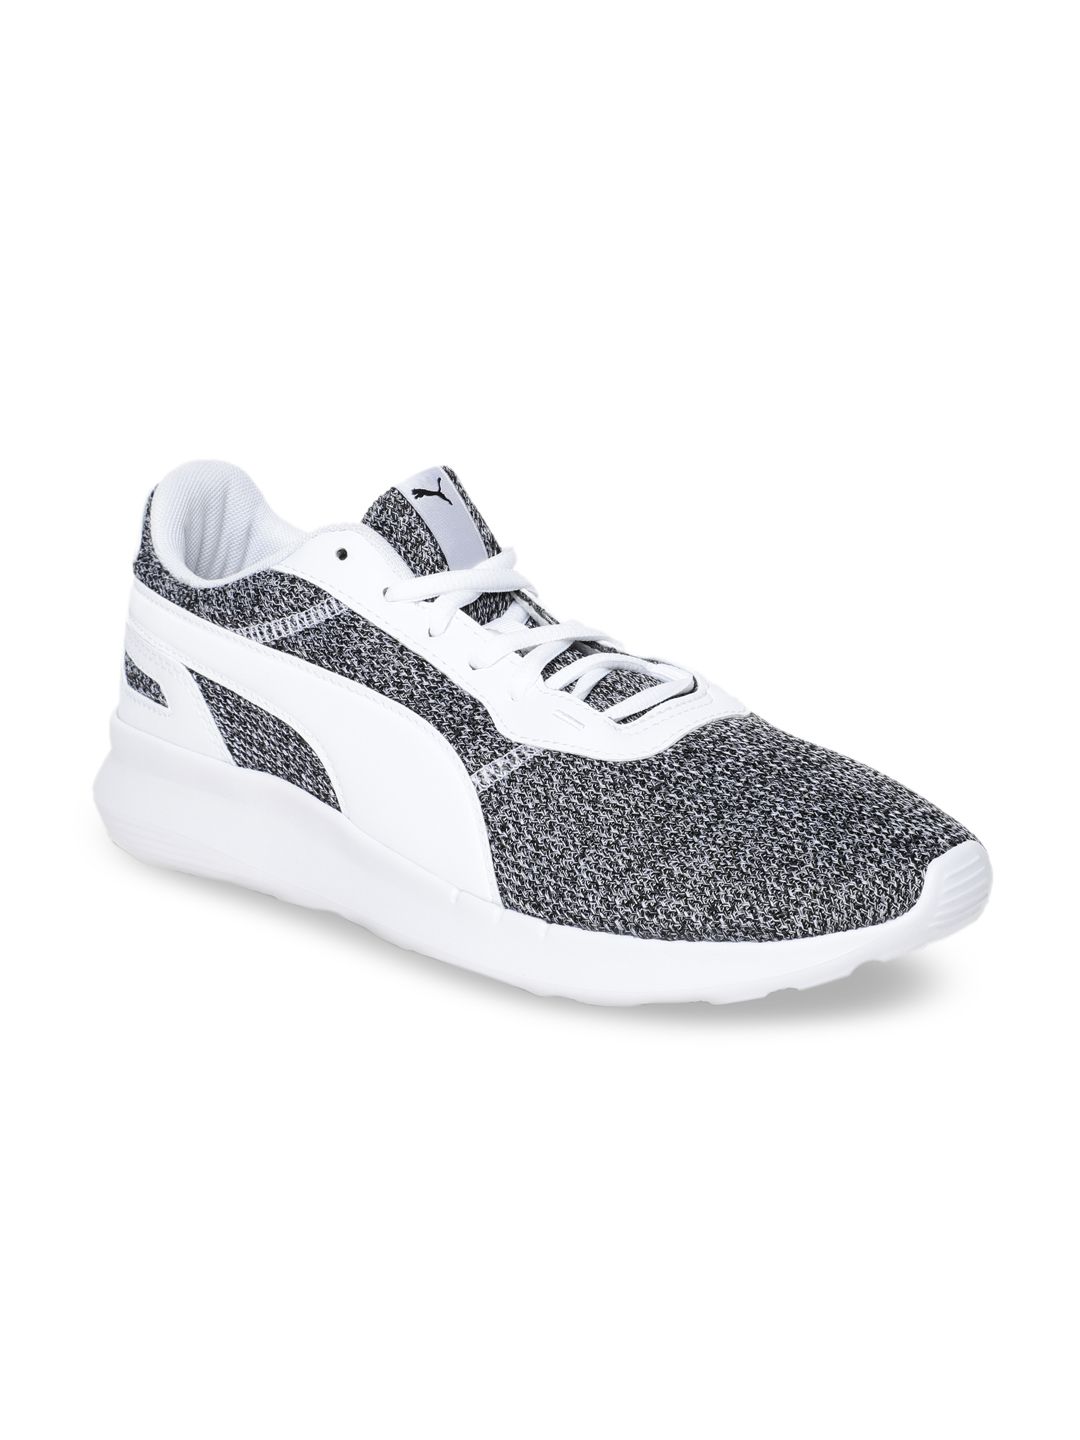 Puma Unisex White Running ST Activate Heather Shoes Price in India